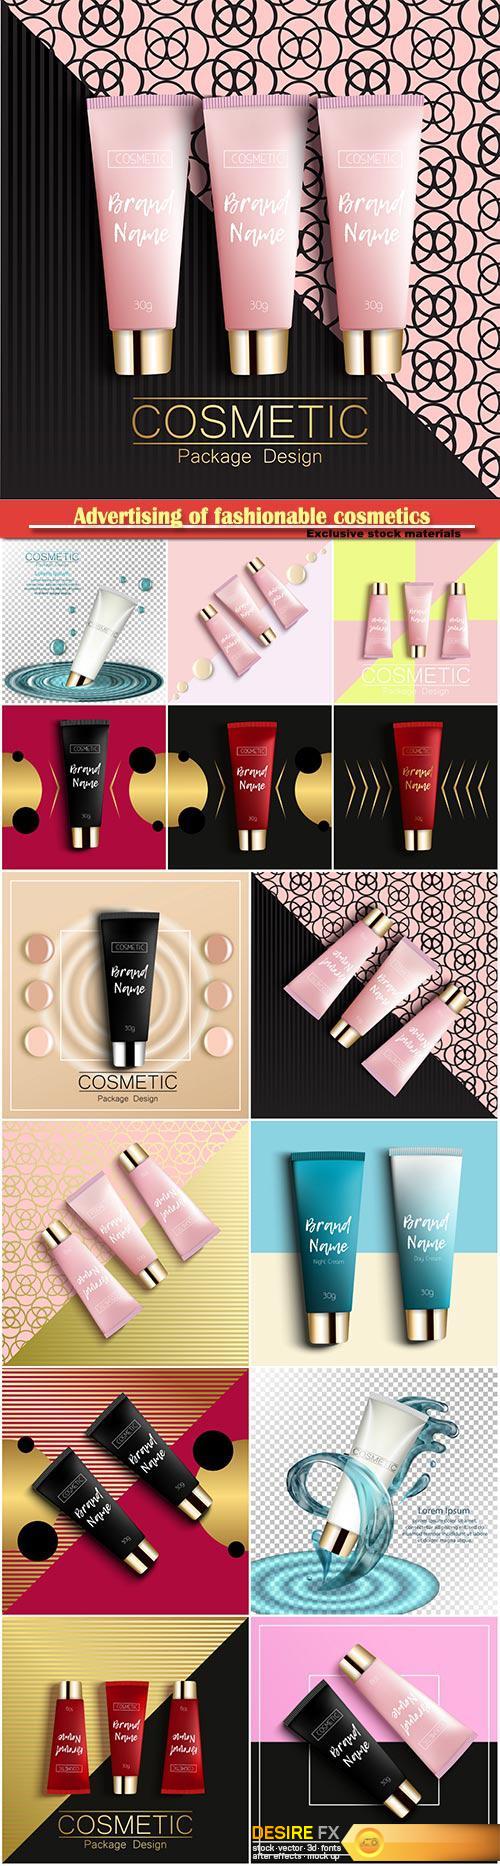 Advertising of fashionable cosmetics, realistic 3D template design cosmetics packaging